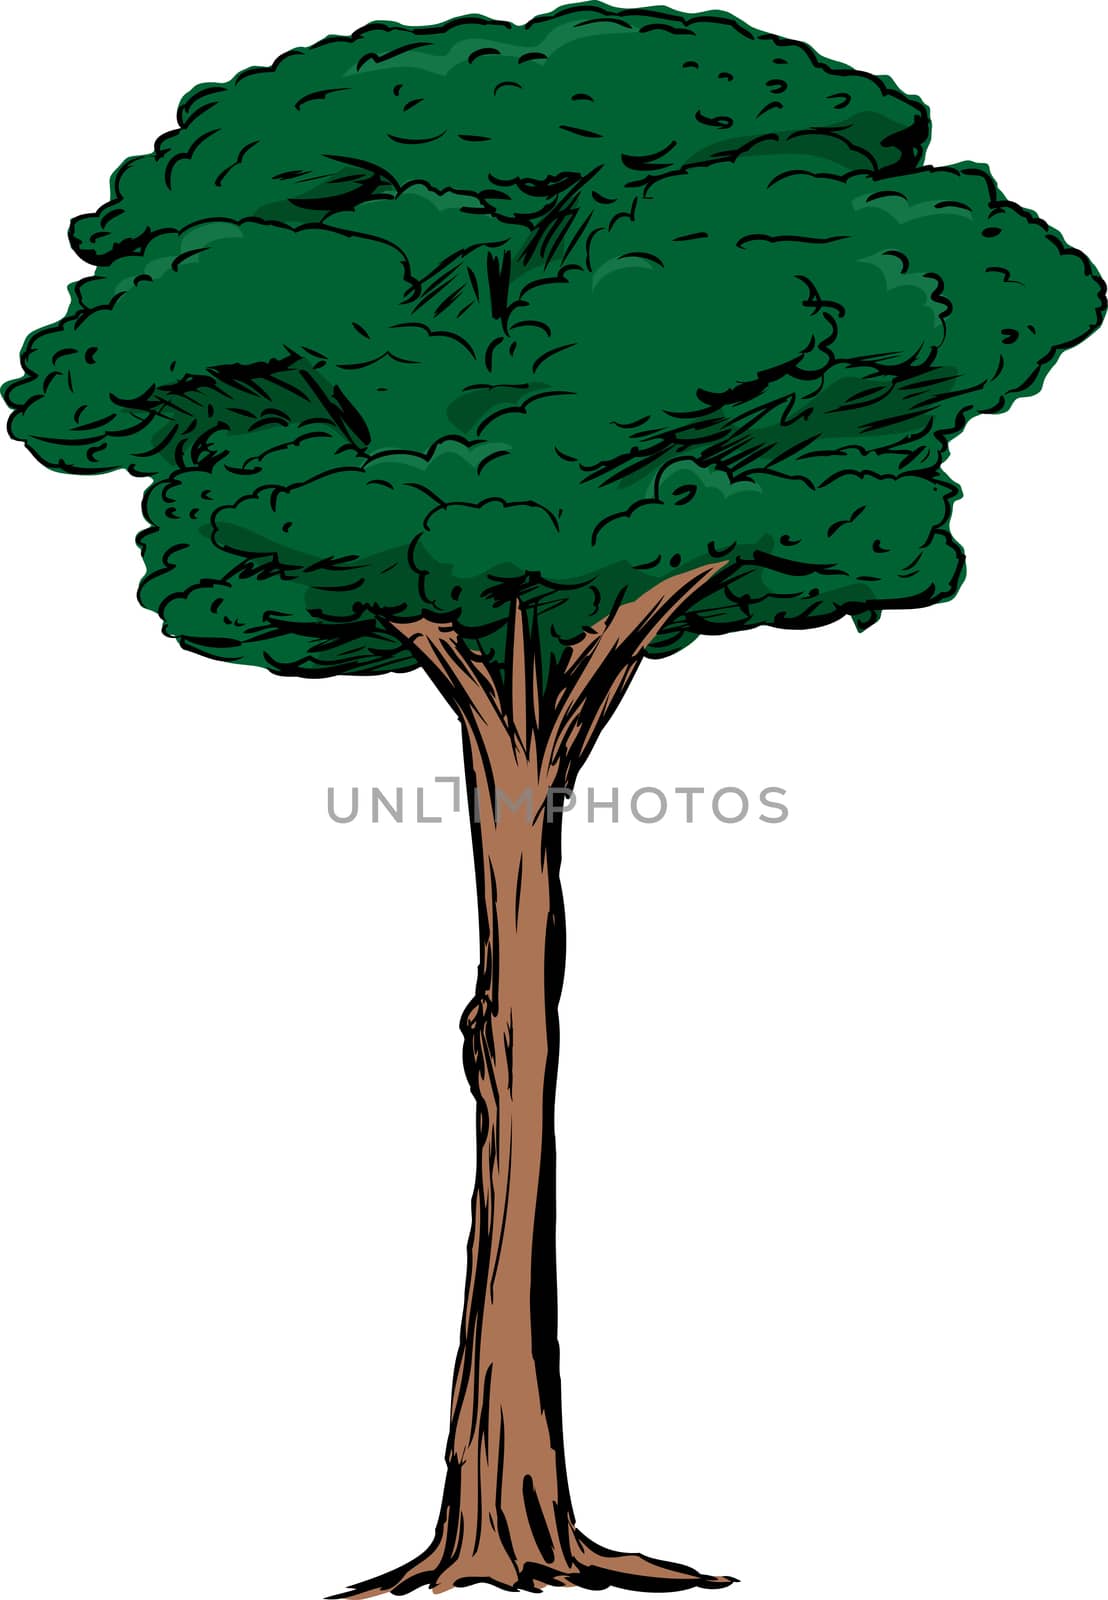 Illustration of single tall dark green tree over isolated white background